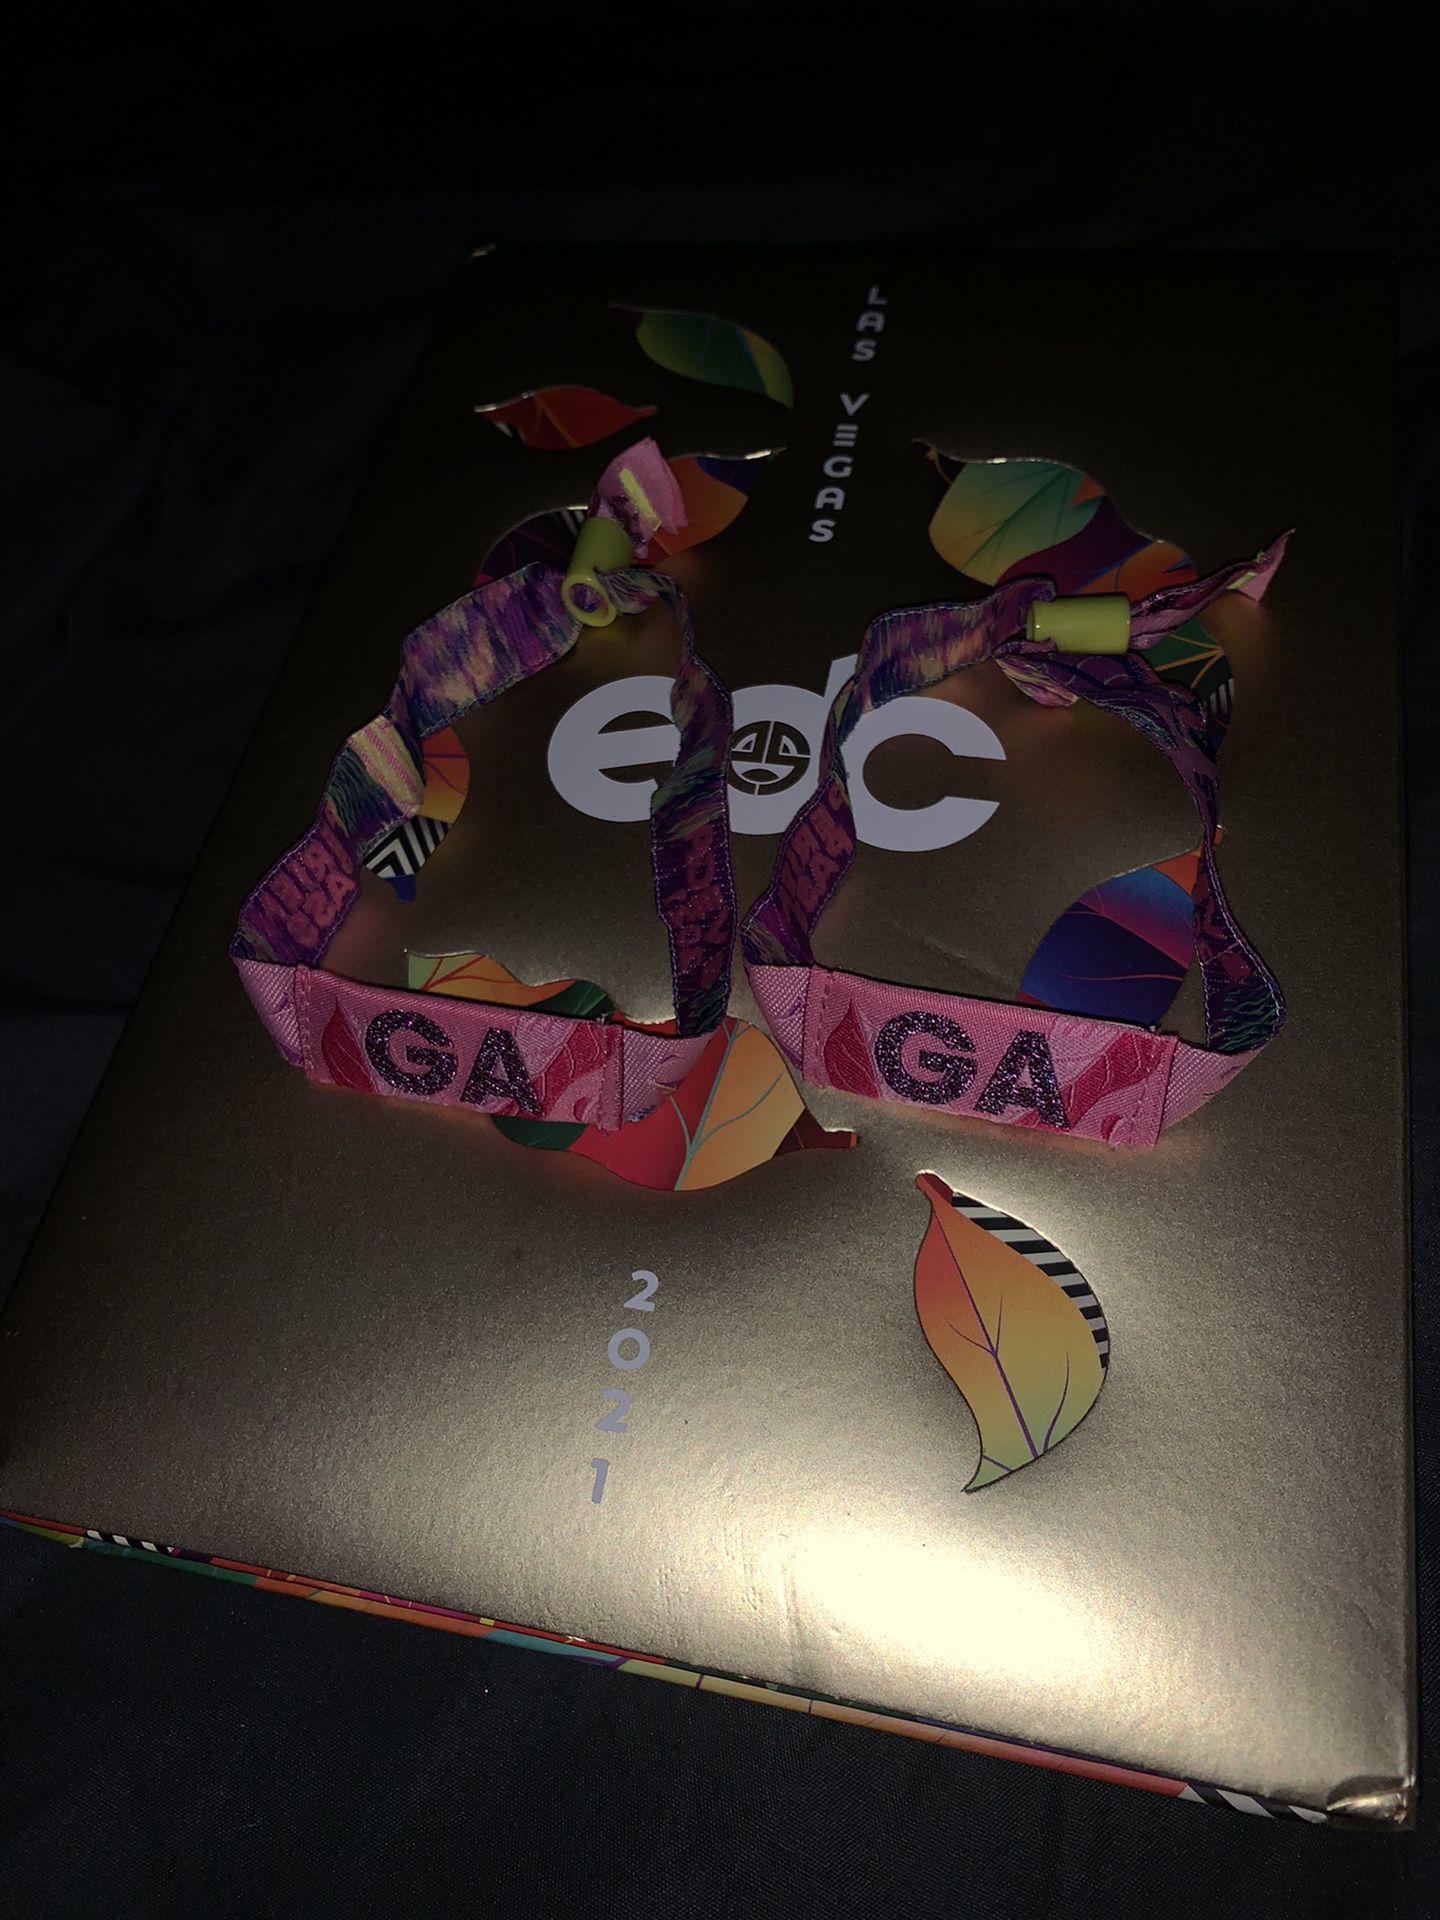 Edc Three Day Pass GA One Left 300 Or Best Offer 